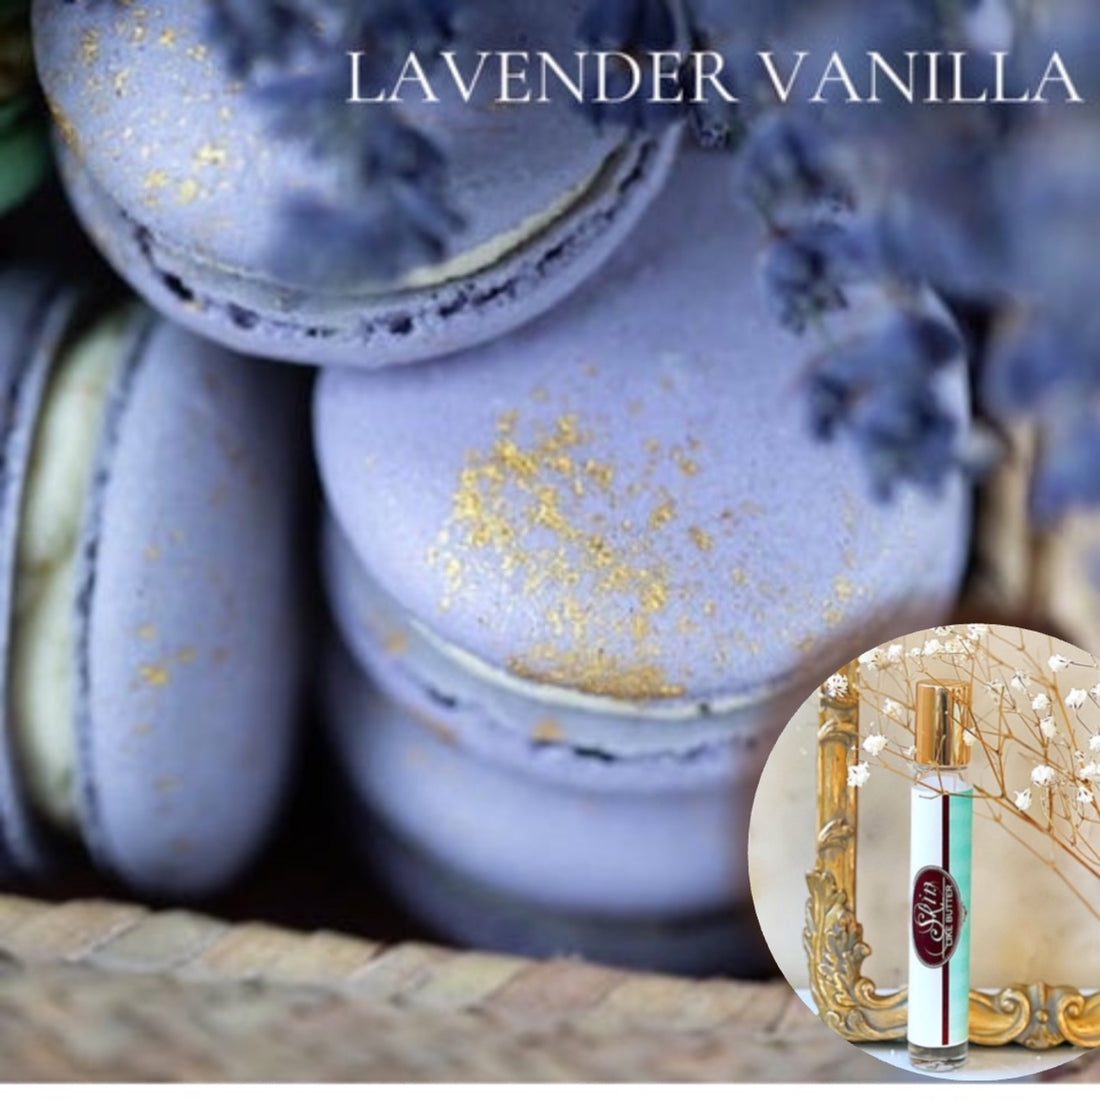 LAVENDER VANILLA Roll on Perfume Sale! ~ Buy 1 get one 50% off-use coupon code 2PLEASE